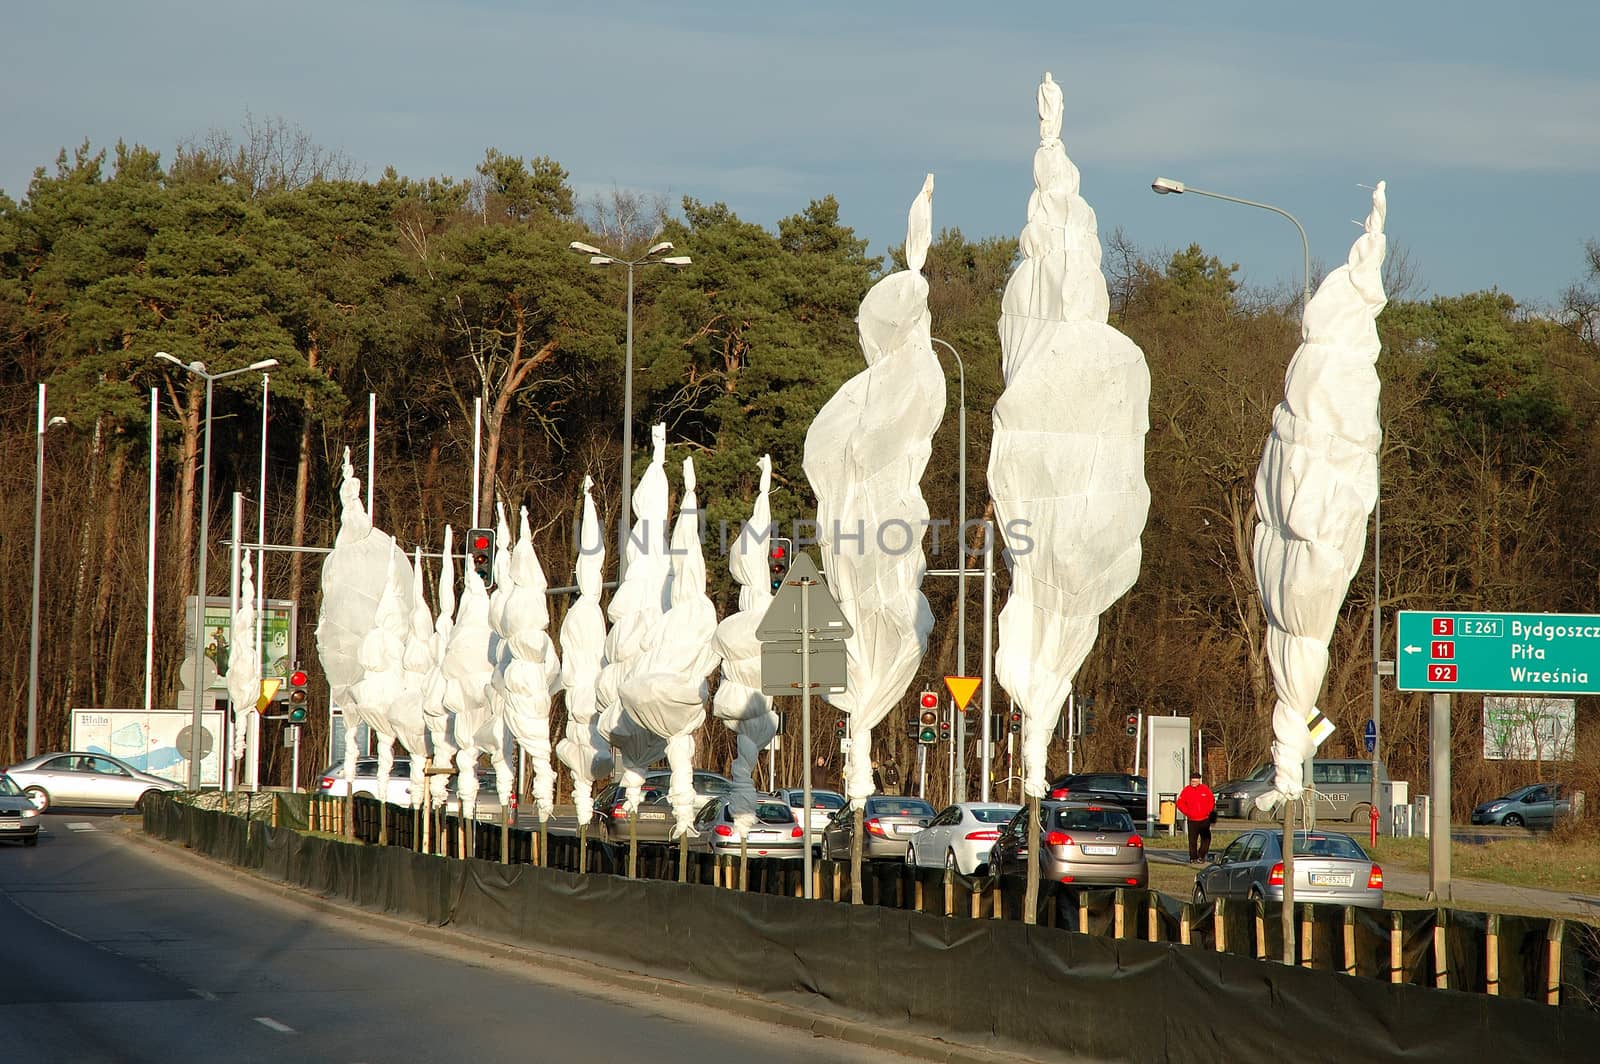 Trees covered for winter with some protective material on street by janhetman